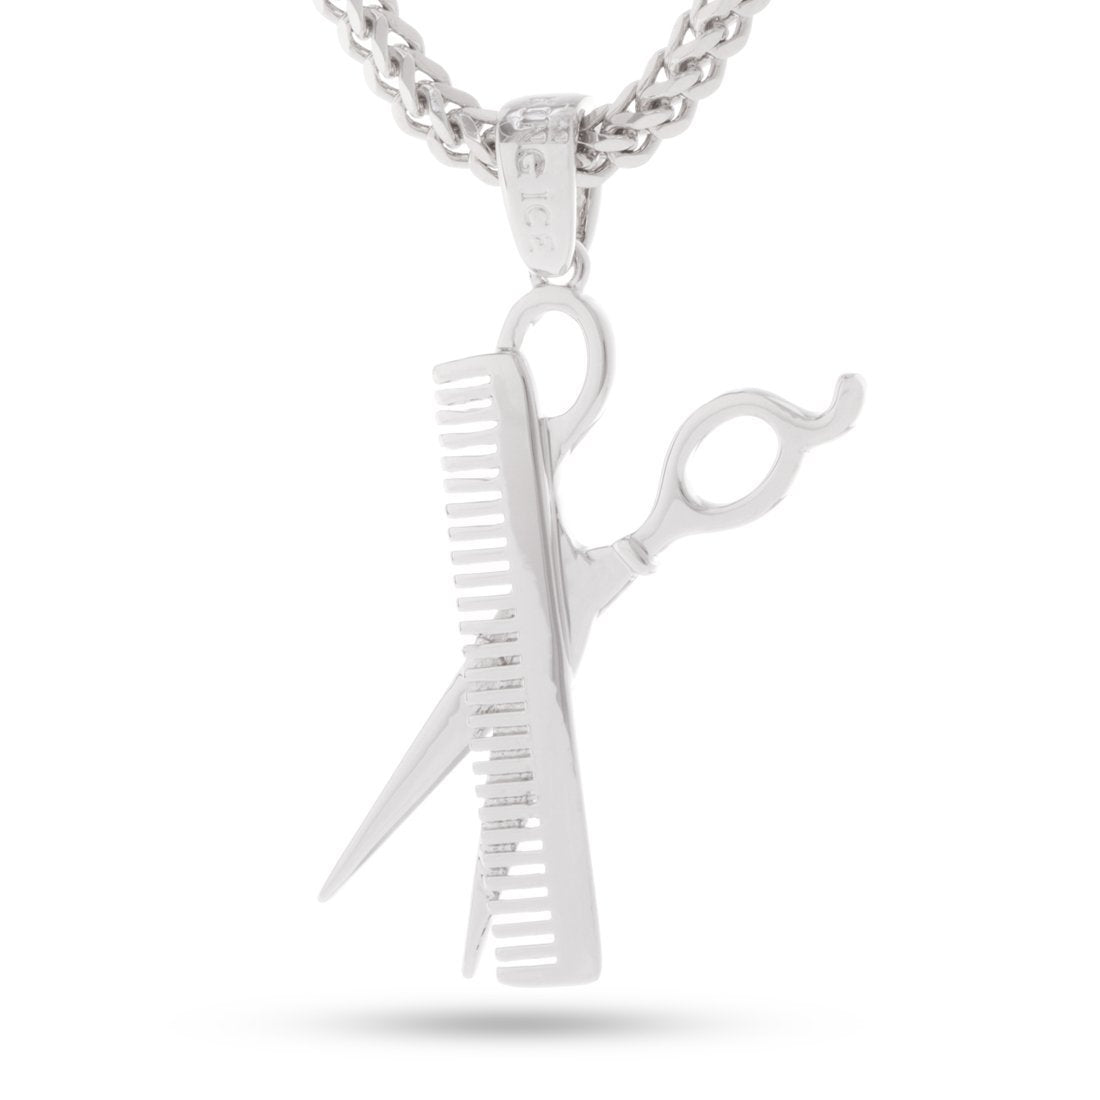 Comb and Scissors Necklace